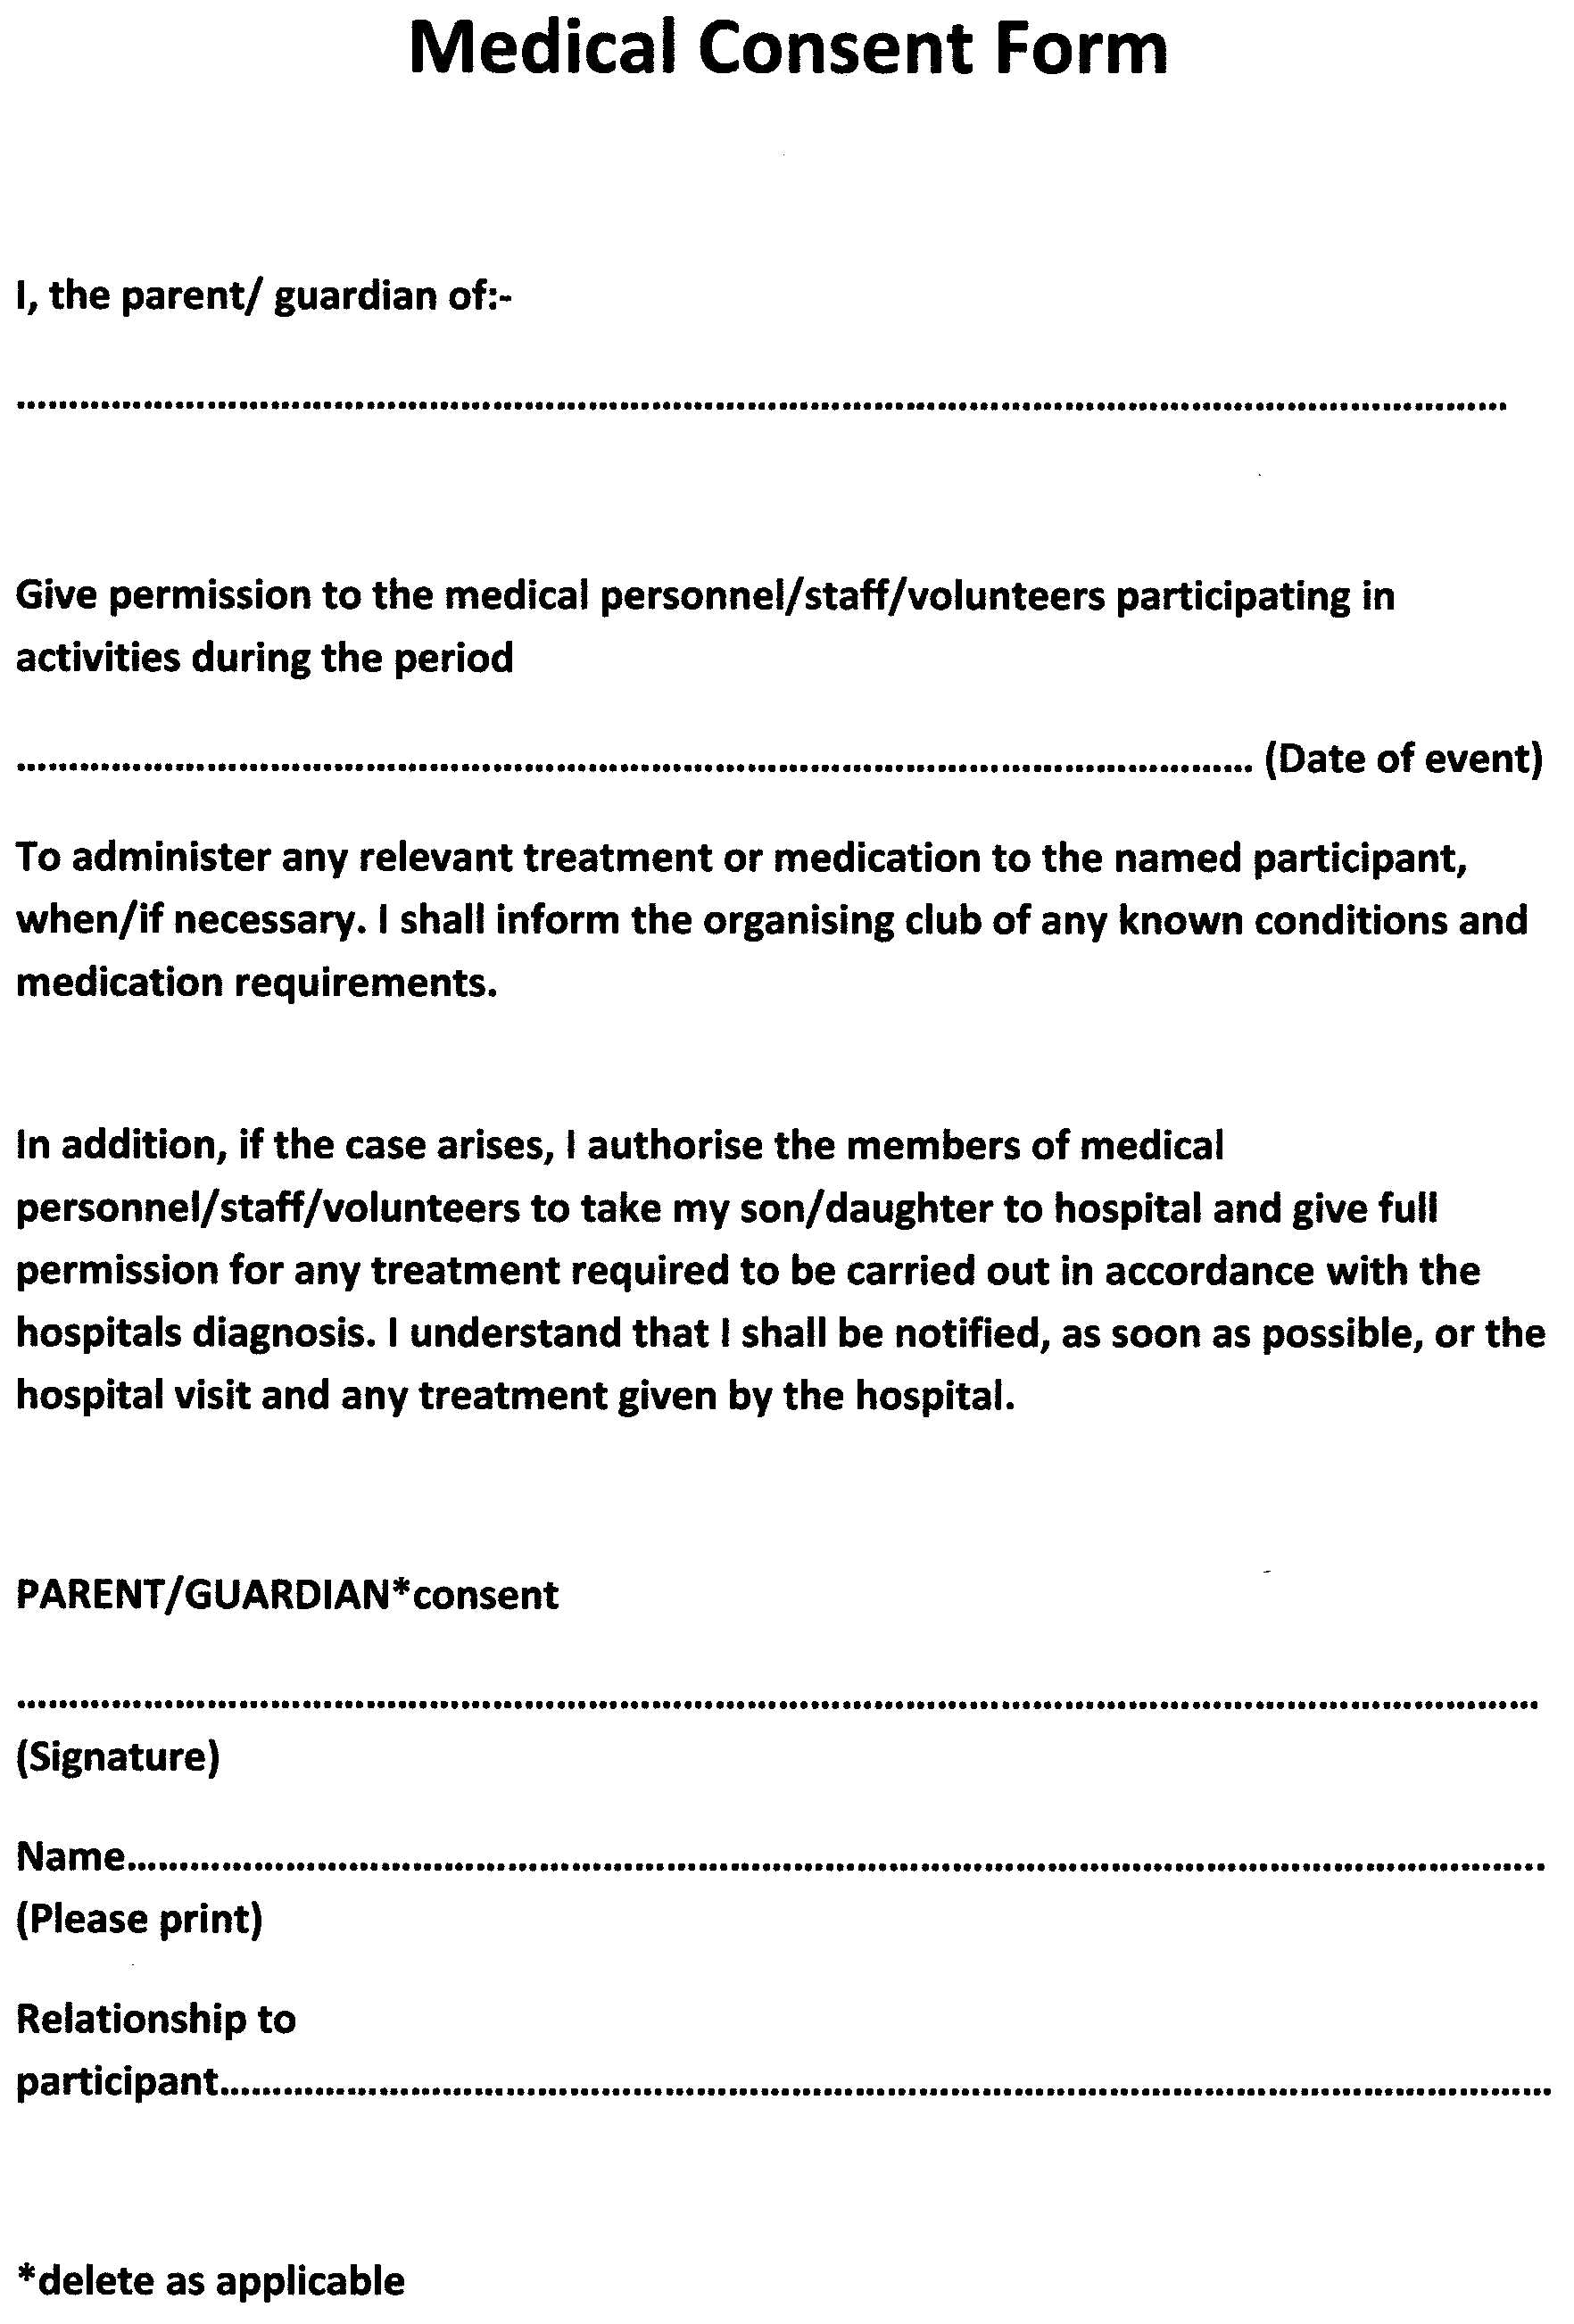 Sample Medical Consent Form | Printable Medical Forms, Letters 